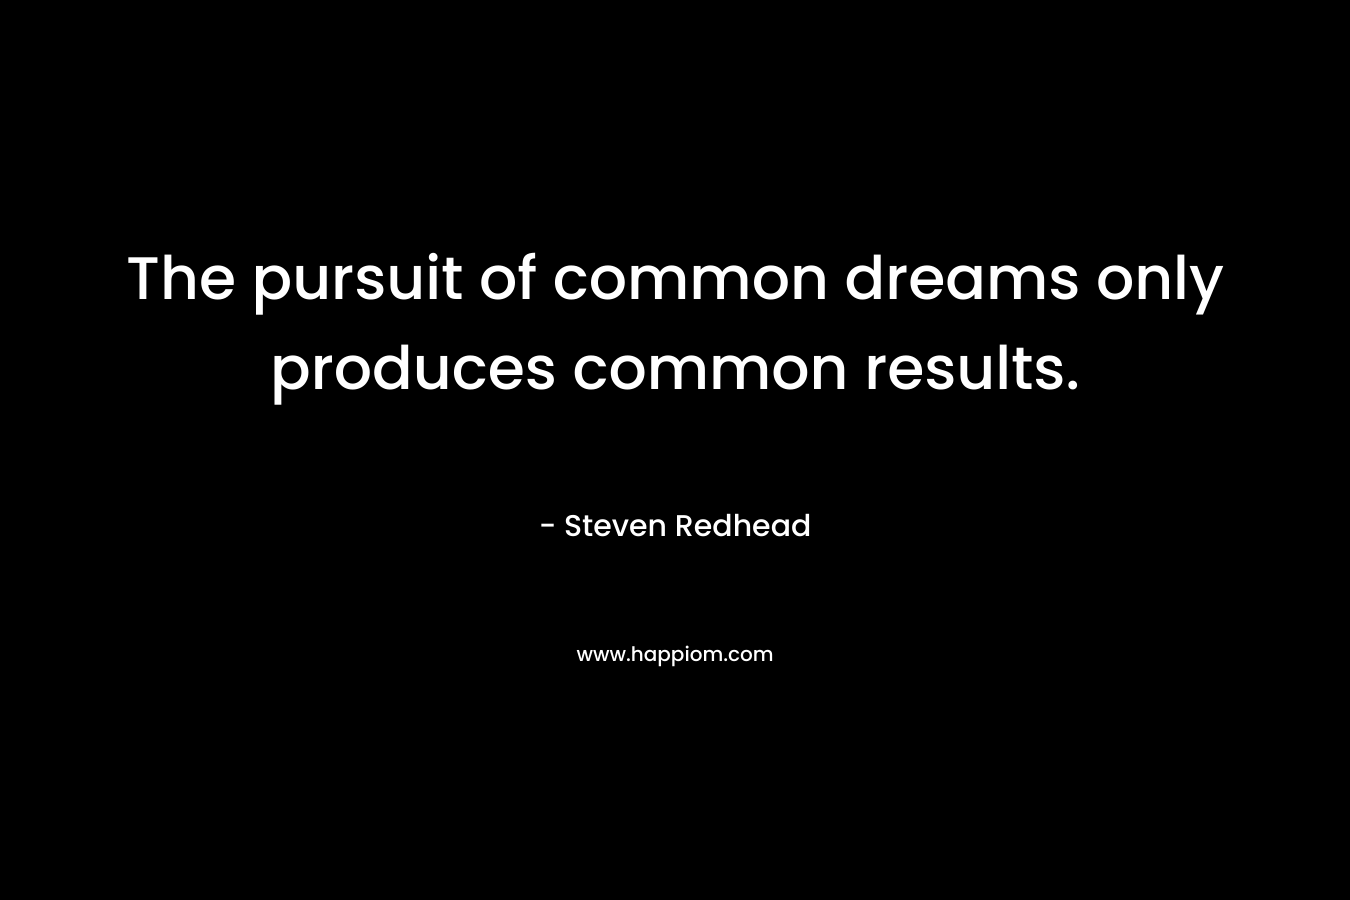 The pursuit of common dreams only produces common results.